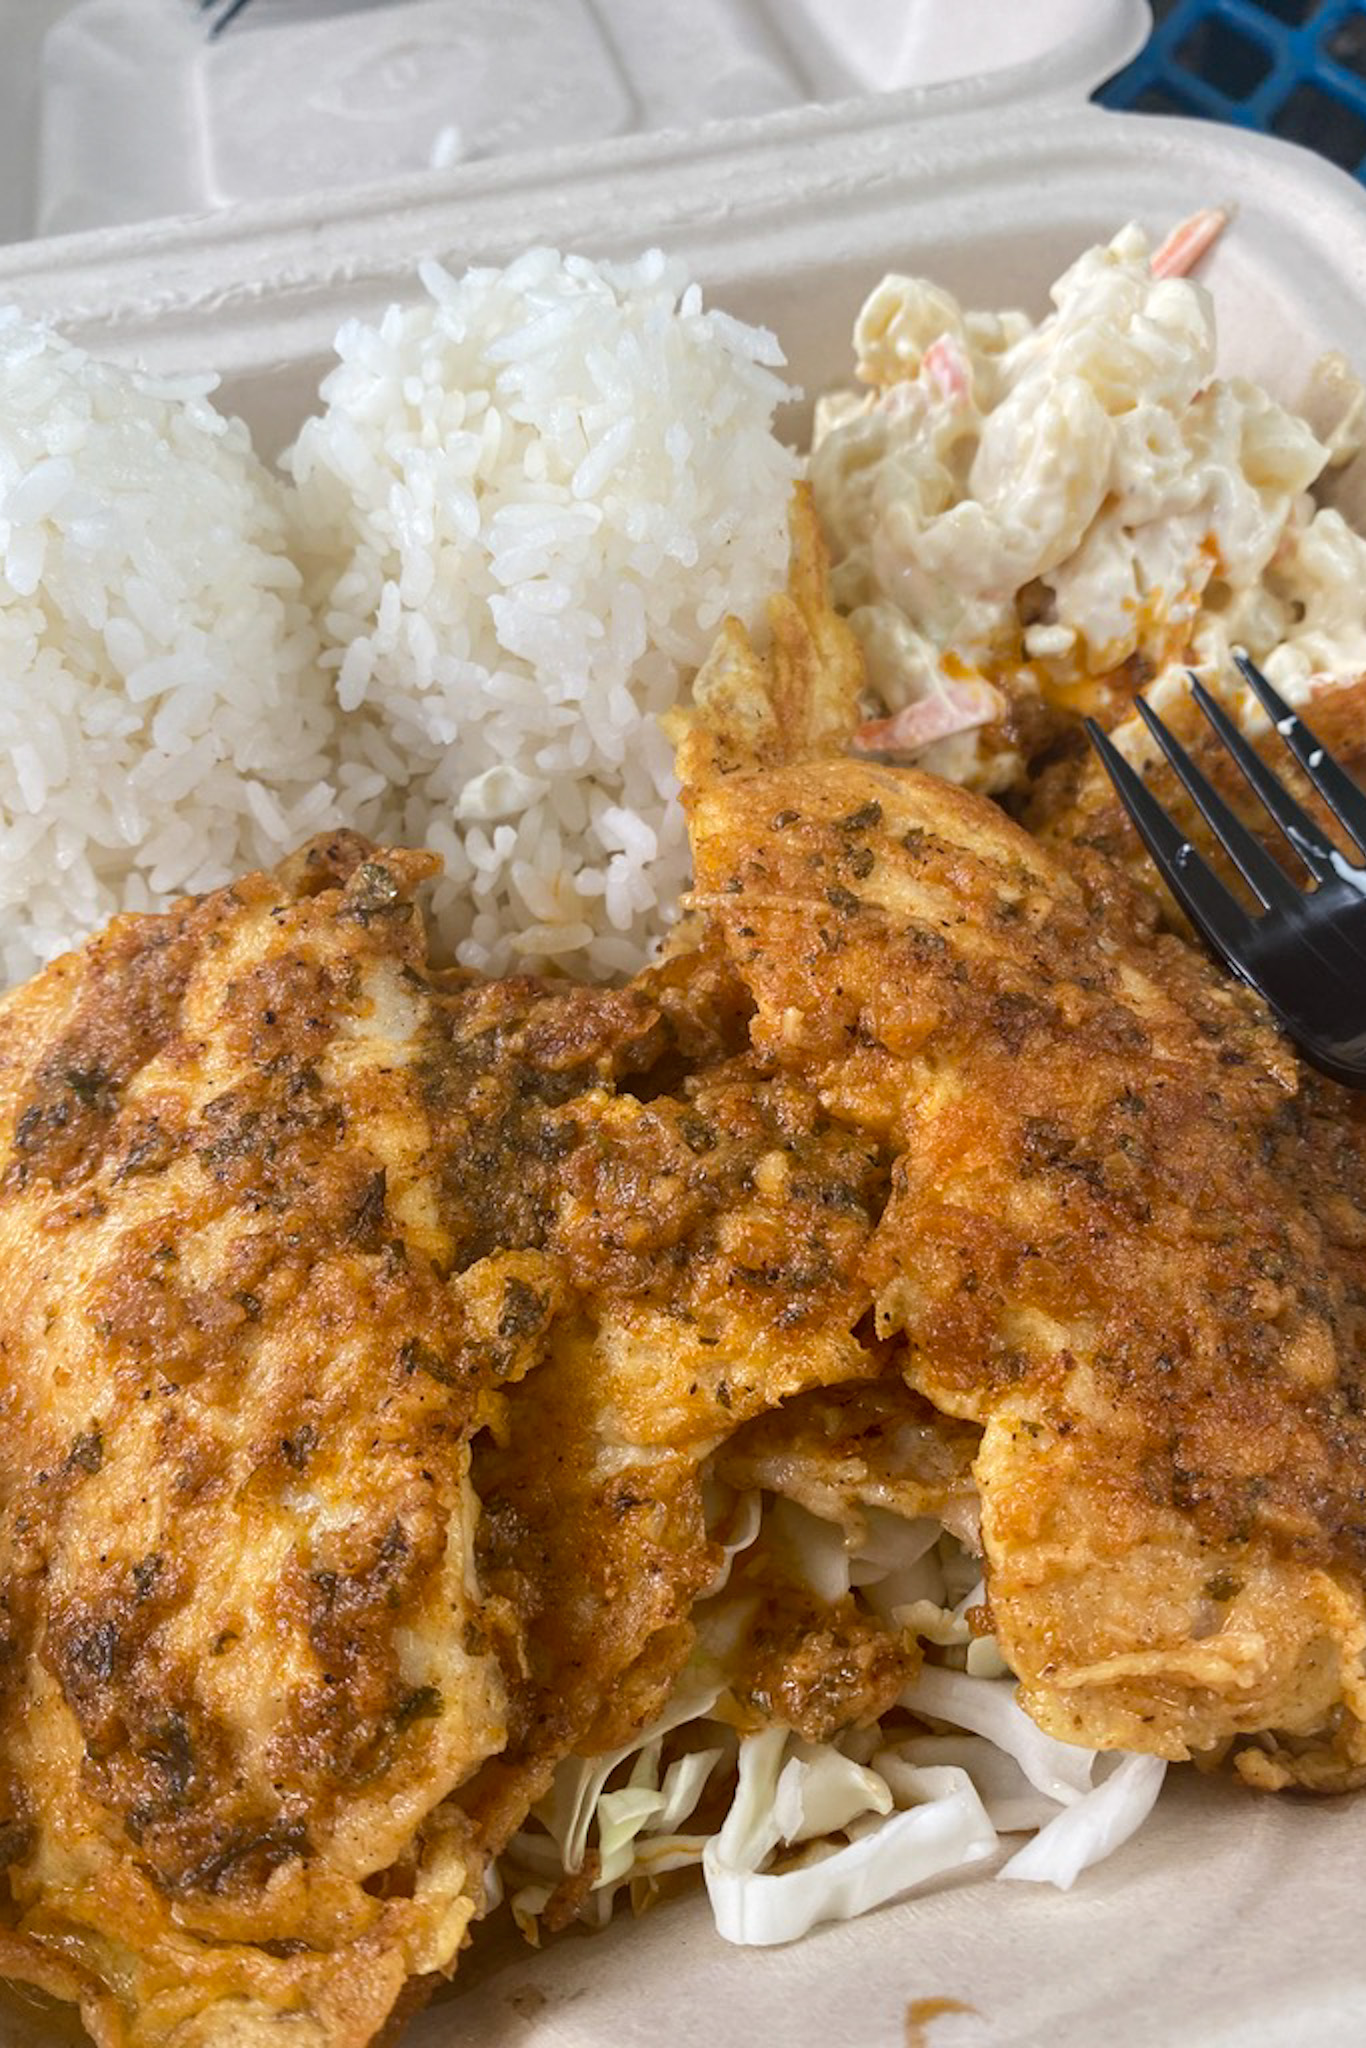 Shoyu Chicken Plate Lunch from Ted's Bakery on Oahu's North Shore - best lunch spots for Hawaii foodies